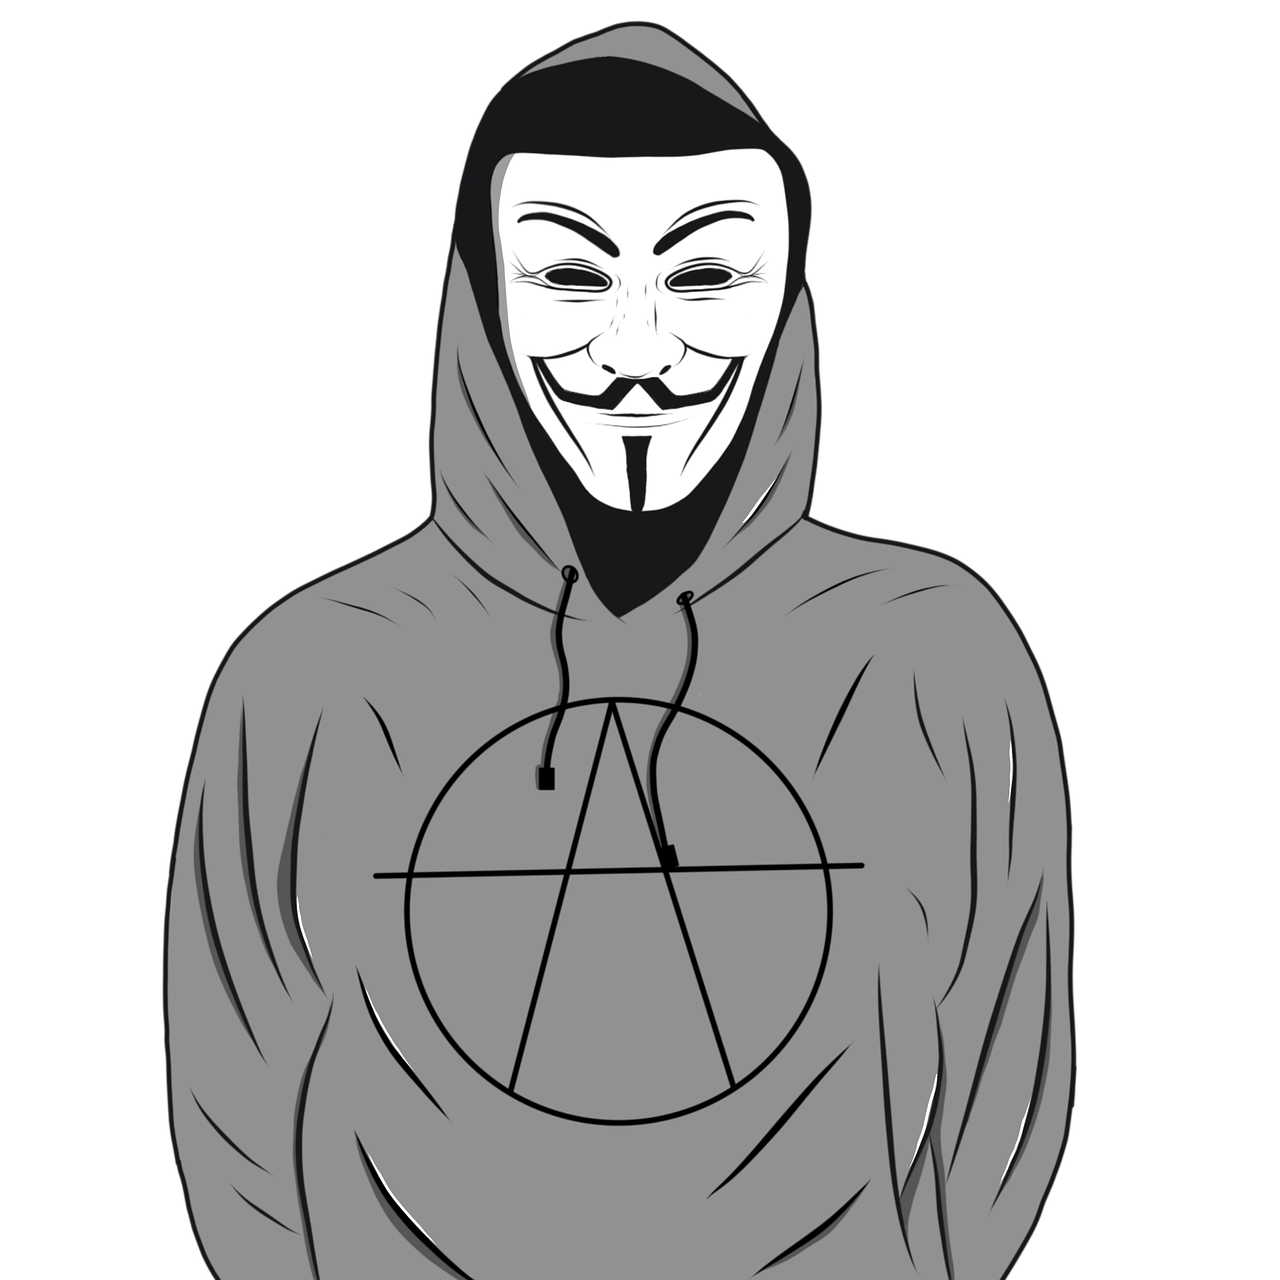 a guy wearing a mask and a hoodie, vector art, sots art, anarchy, very minimal vector art, on a gray background, anonymous